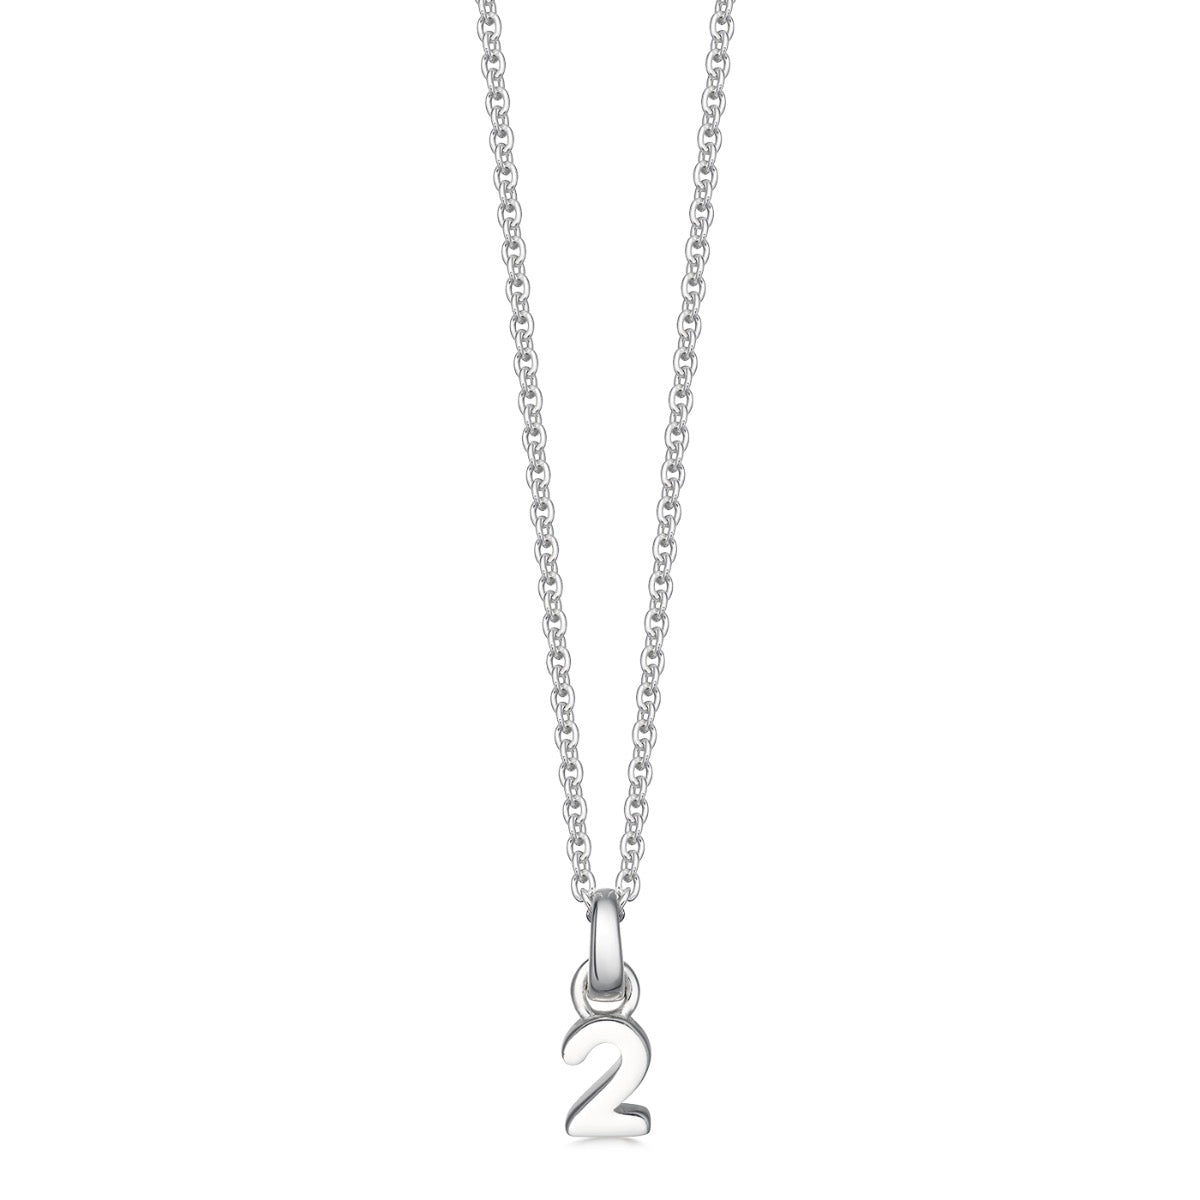 Silver Number 2 Pendant Necklace | Hersey & Son Silversmiths